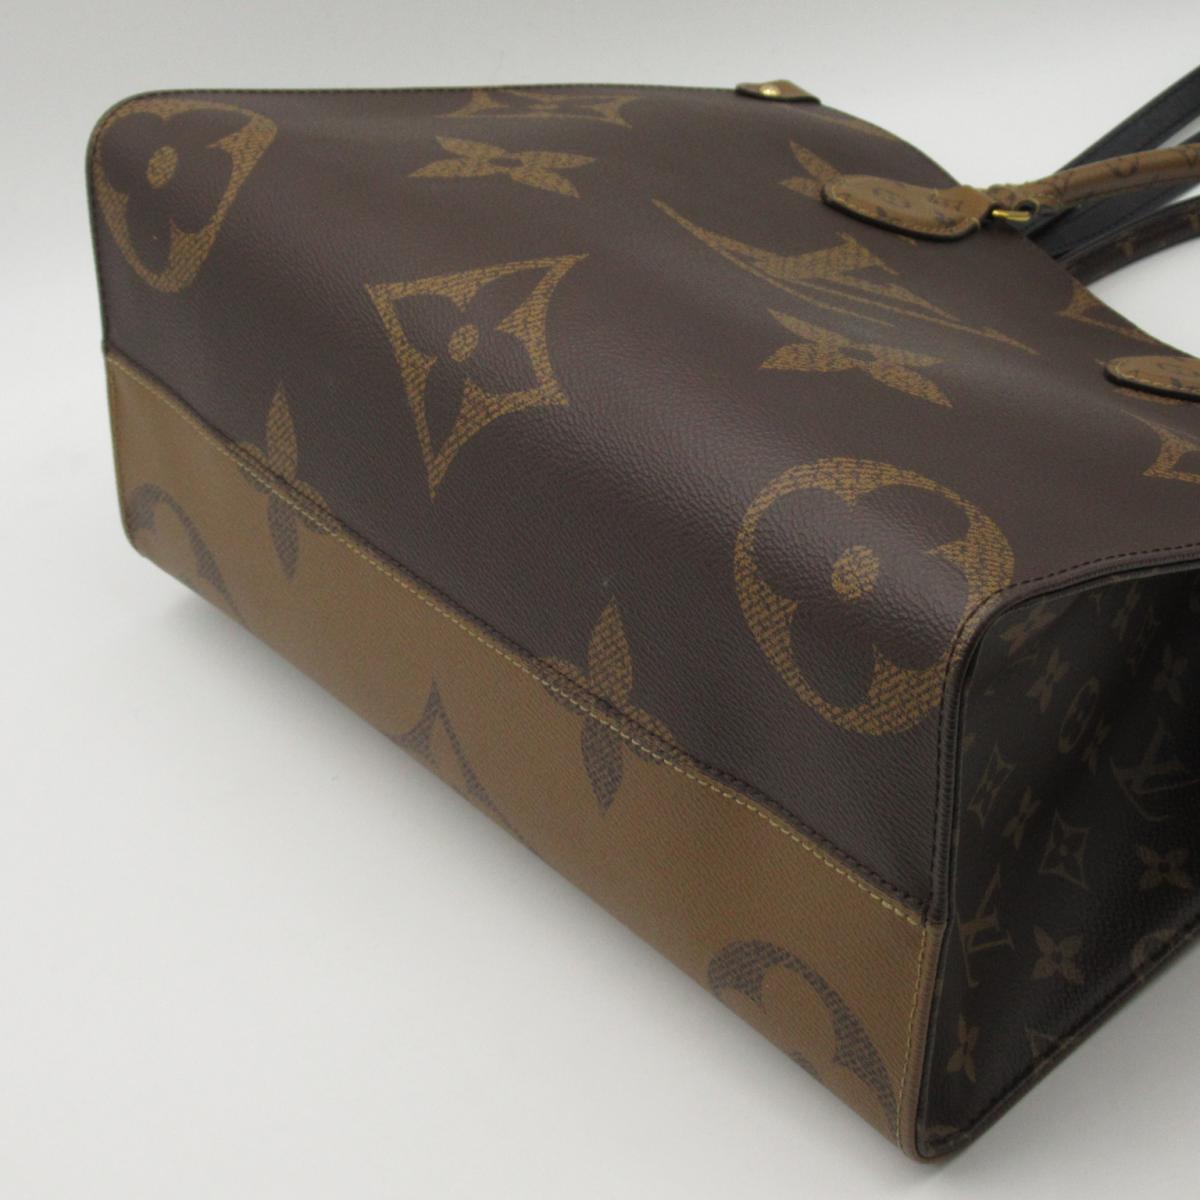 Replica Louis Vuitton Onthego MM Bag Giant Monogram Reverse M45321 BLV340  for Sale